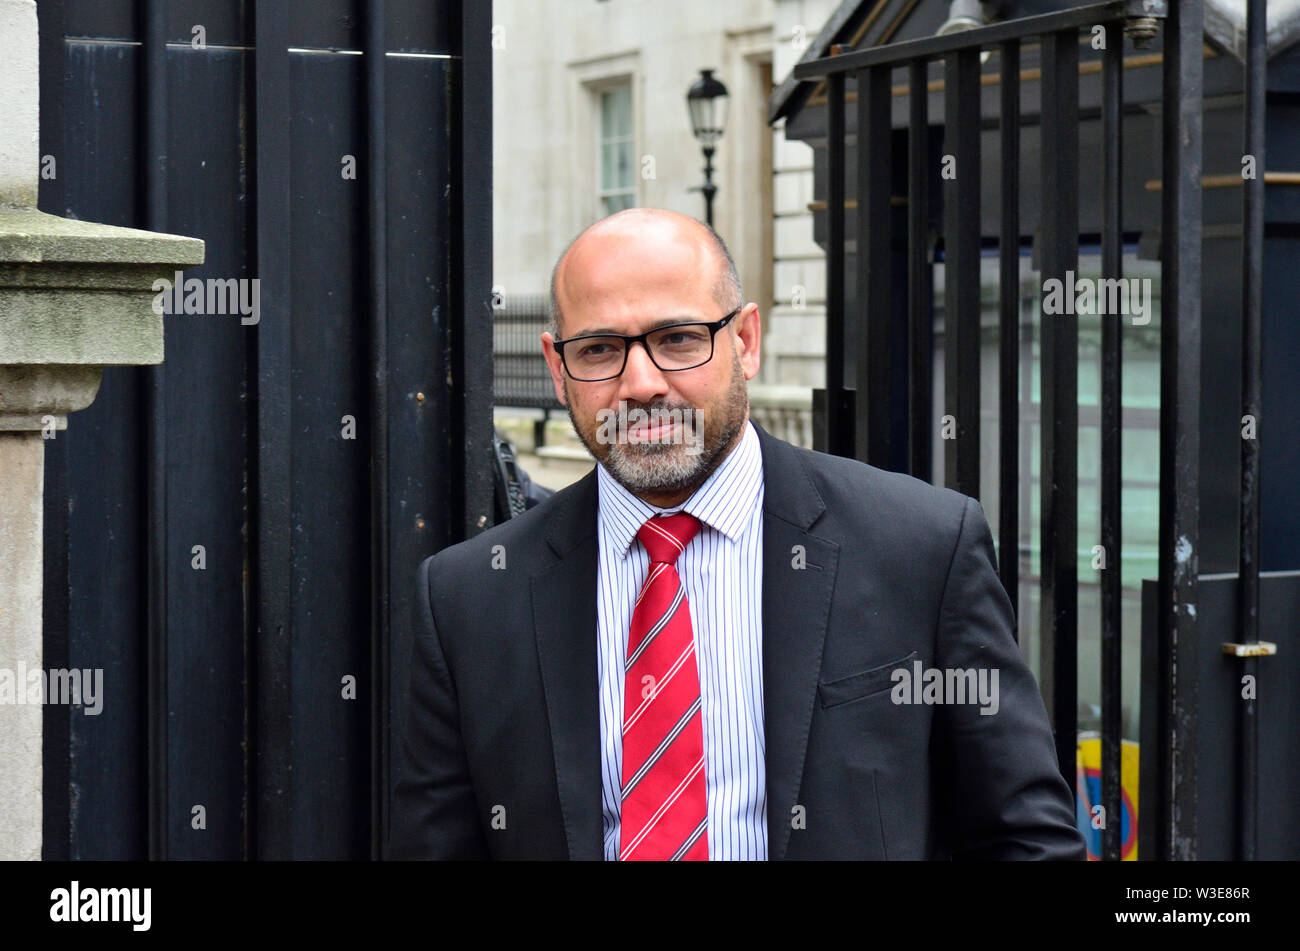 Neil Basu - assistant commissioner, Metropolitan Police - leaving Downing Street after a meeting at No 10, April 2019 Stock Photo